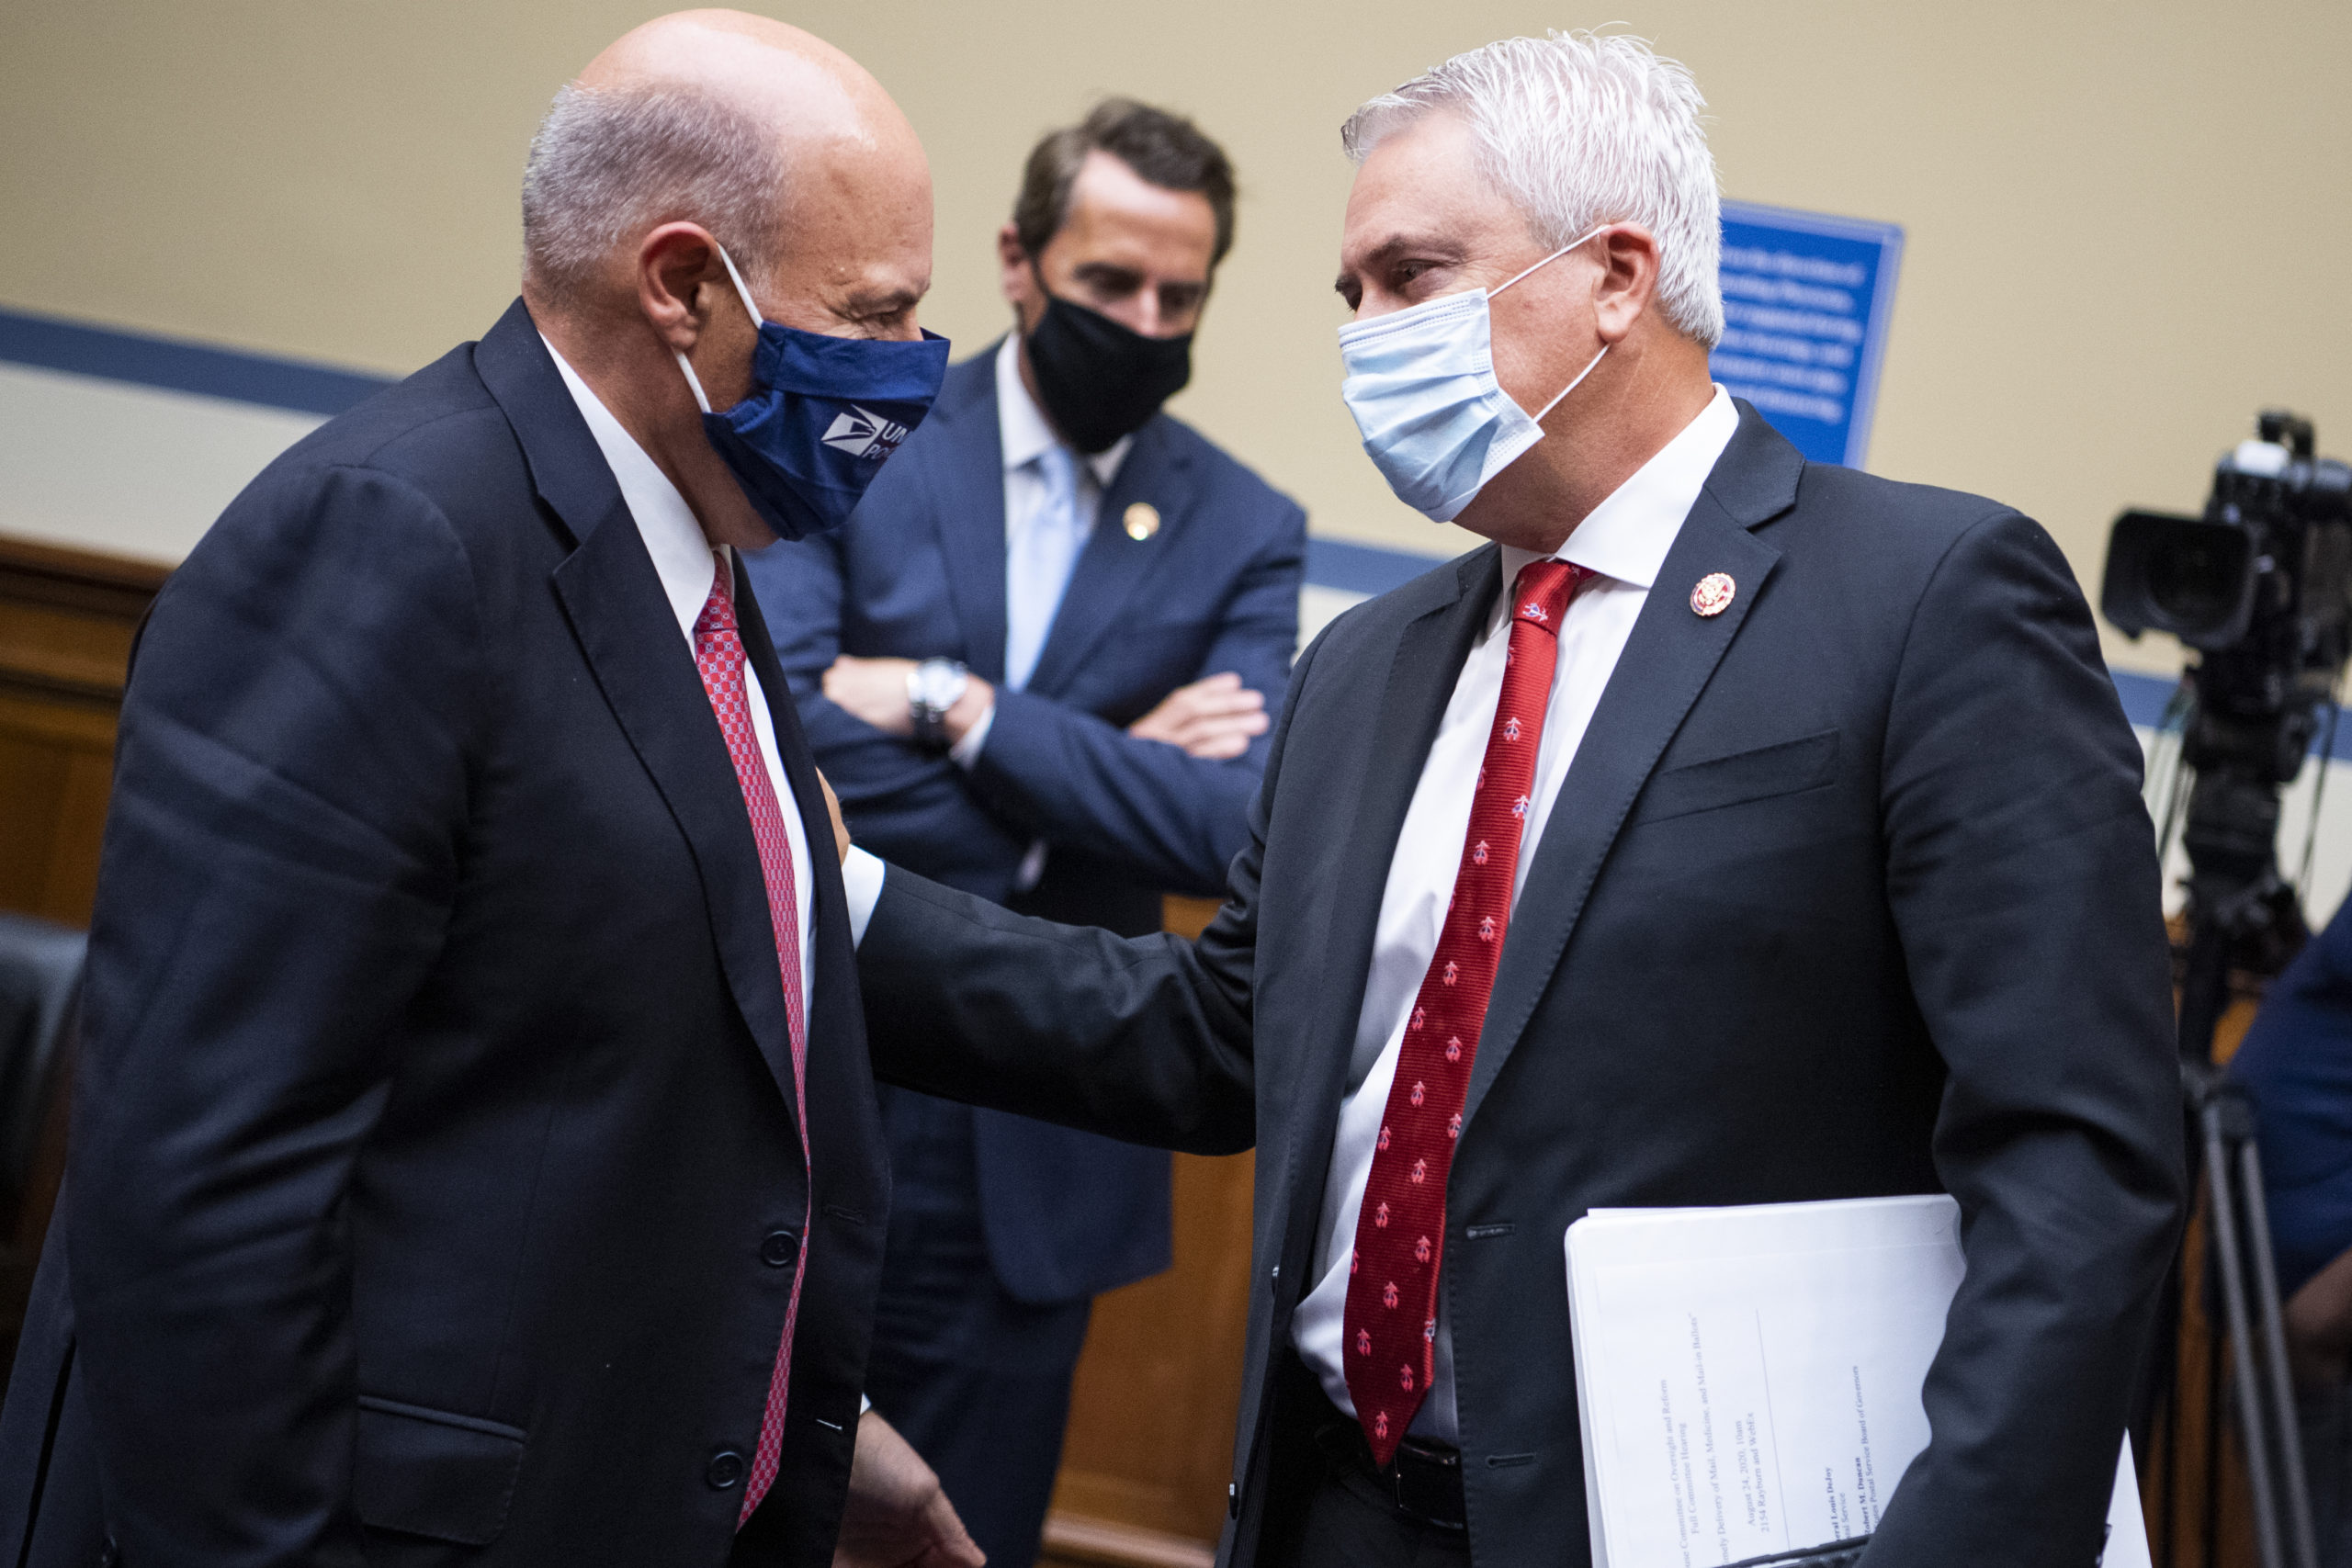 Postmaster General Louis DeJoy exchanges words with Rep. James Comer, the House Oversight Committee's top Republican, during Monday's hearing. (Photo: Pool , Getty Images)